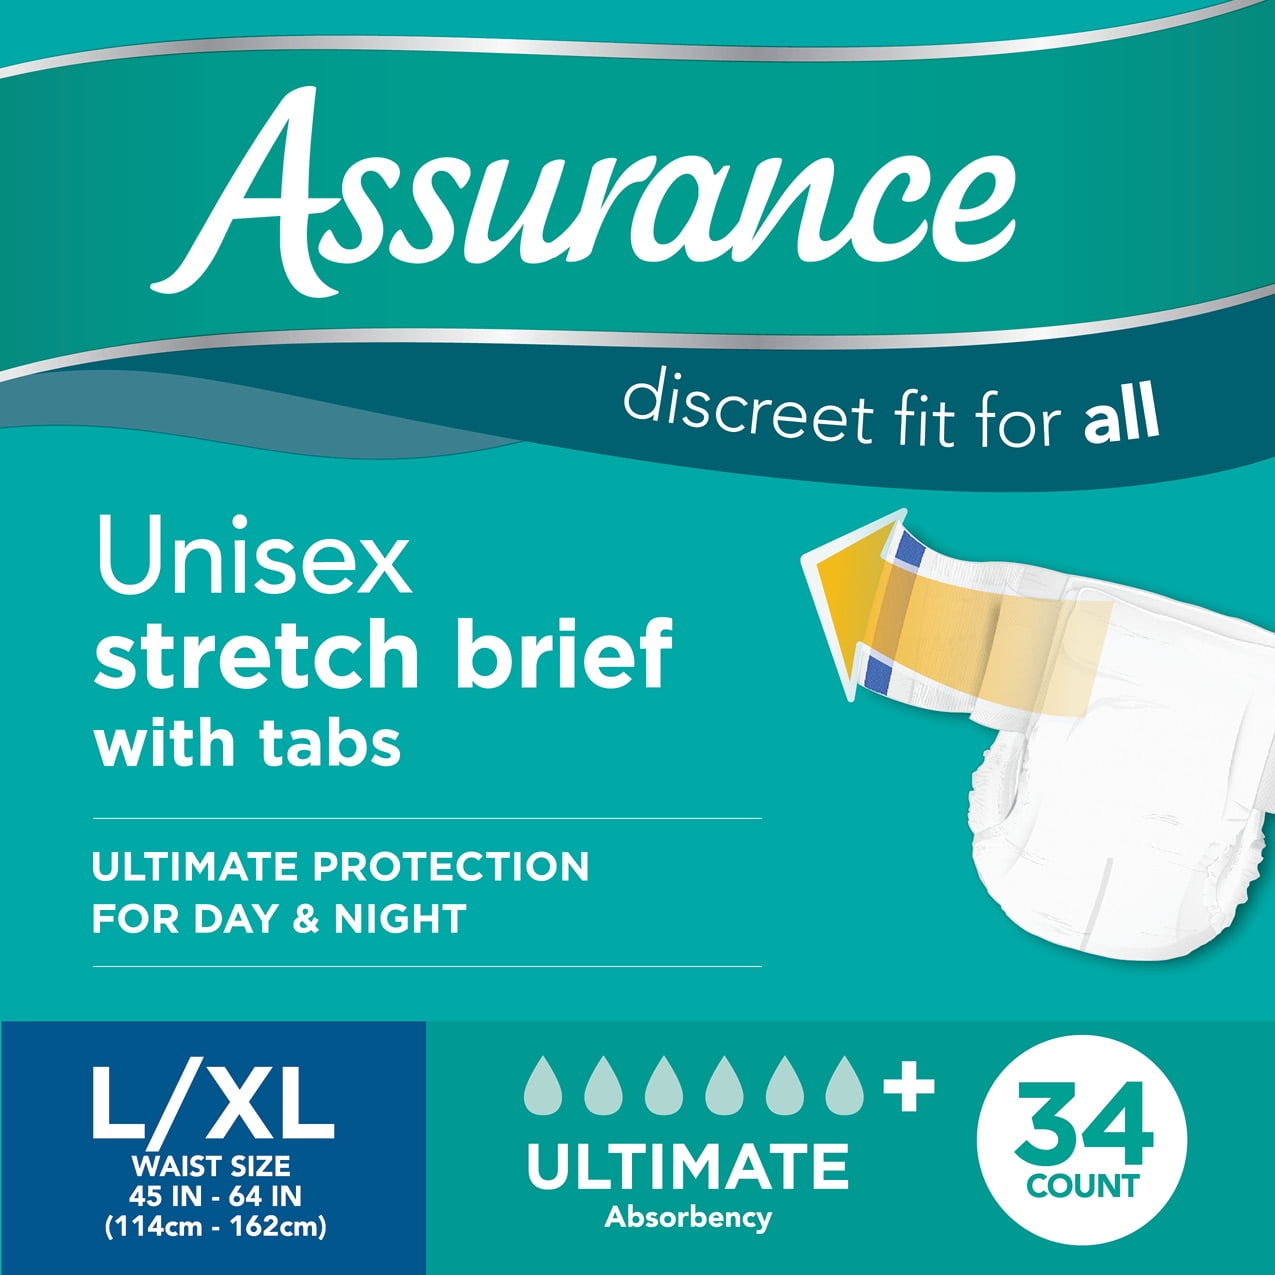 Assurance L/XL Unisex Stretch Briefs With Tabs 68 Ct 